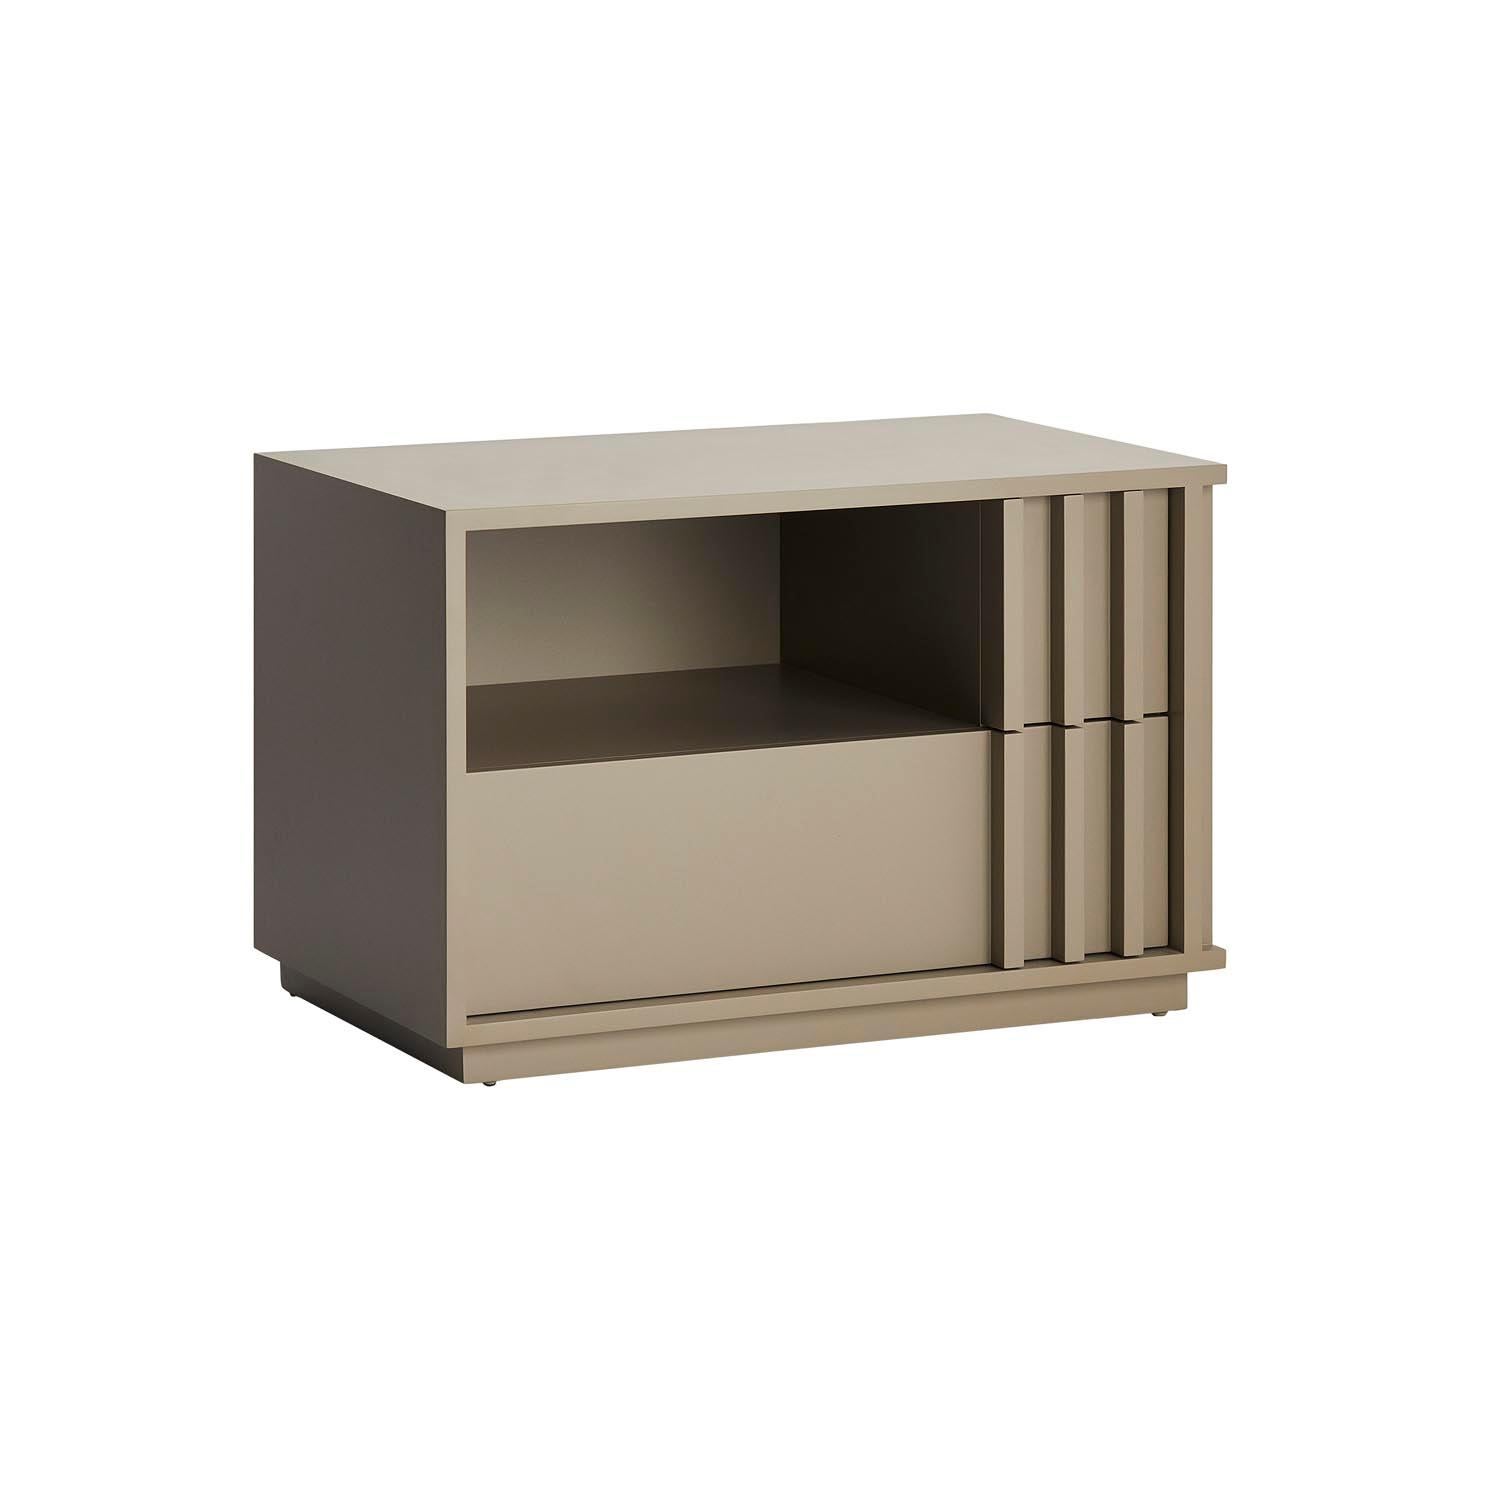 Relevo is a modern and sober bedside table made of wood with lacquered finish and equipped with a open unit and two drawers lined with suede.‎ Relevo is also available in veneered wood.‎

Shown in Glossy Lacquered structure in CM8 color.
 